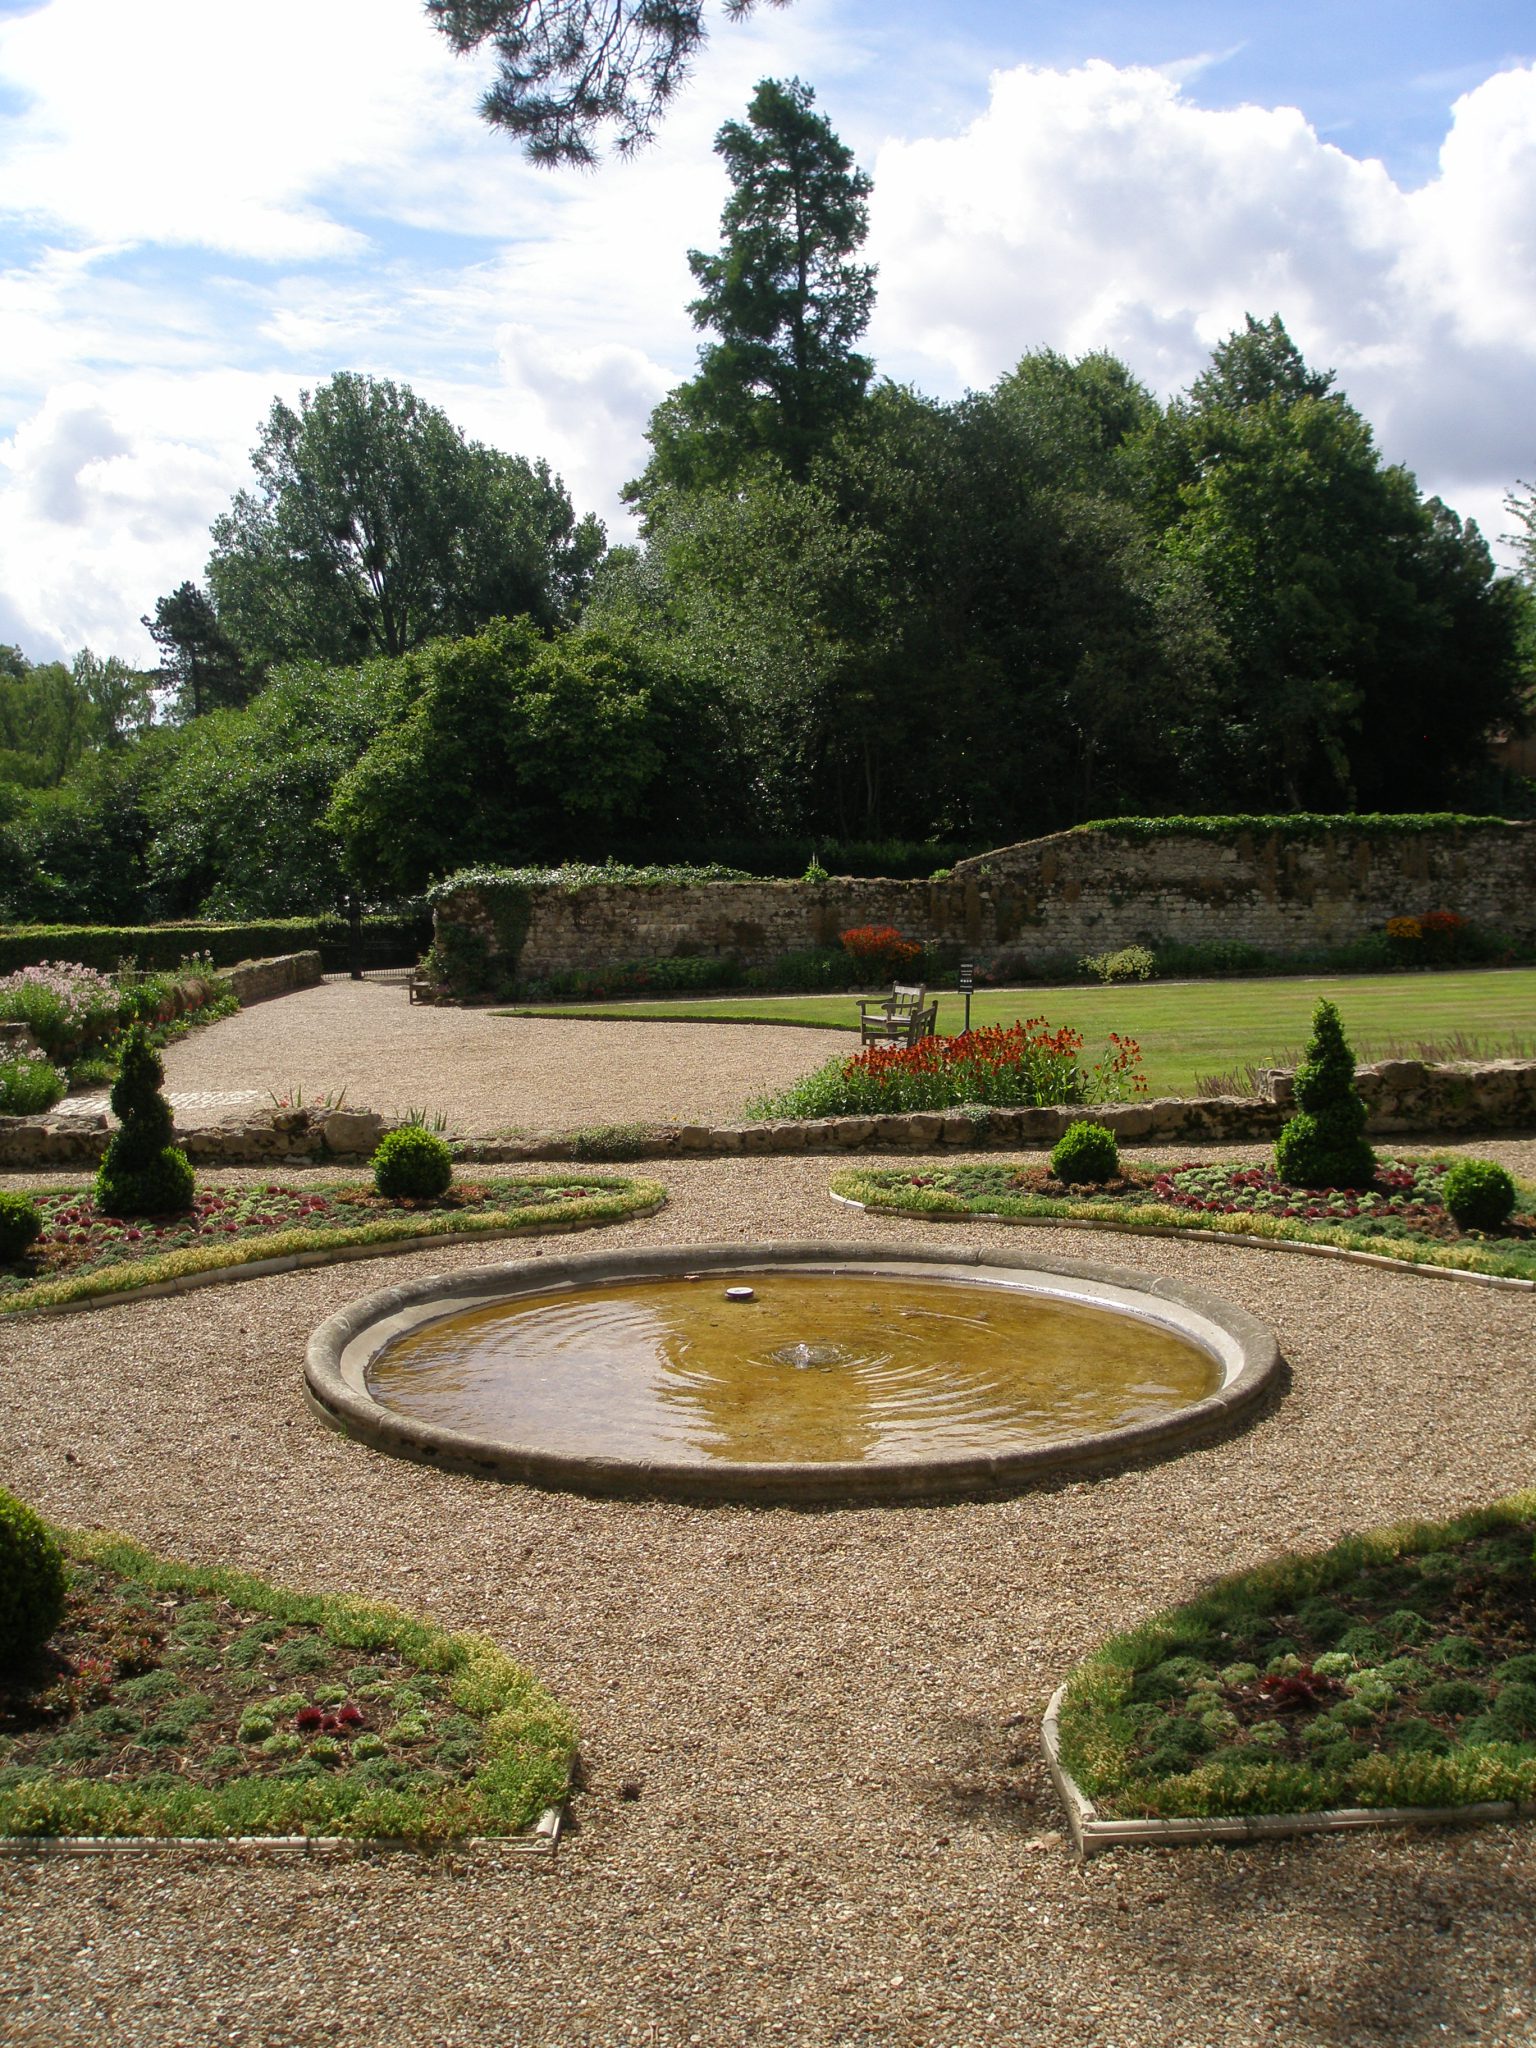 Another view of the Formal Garden